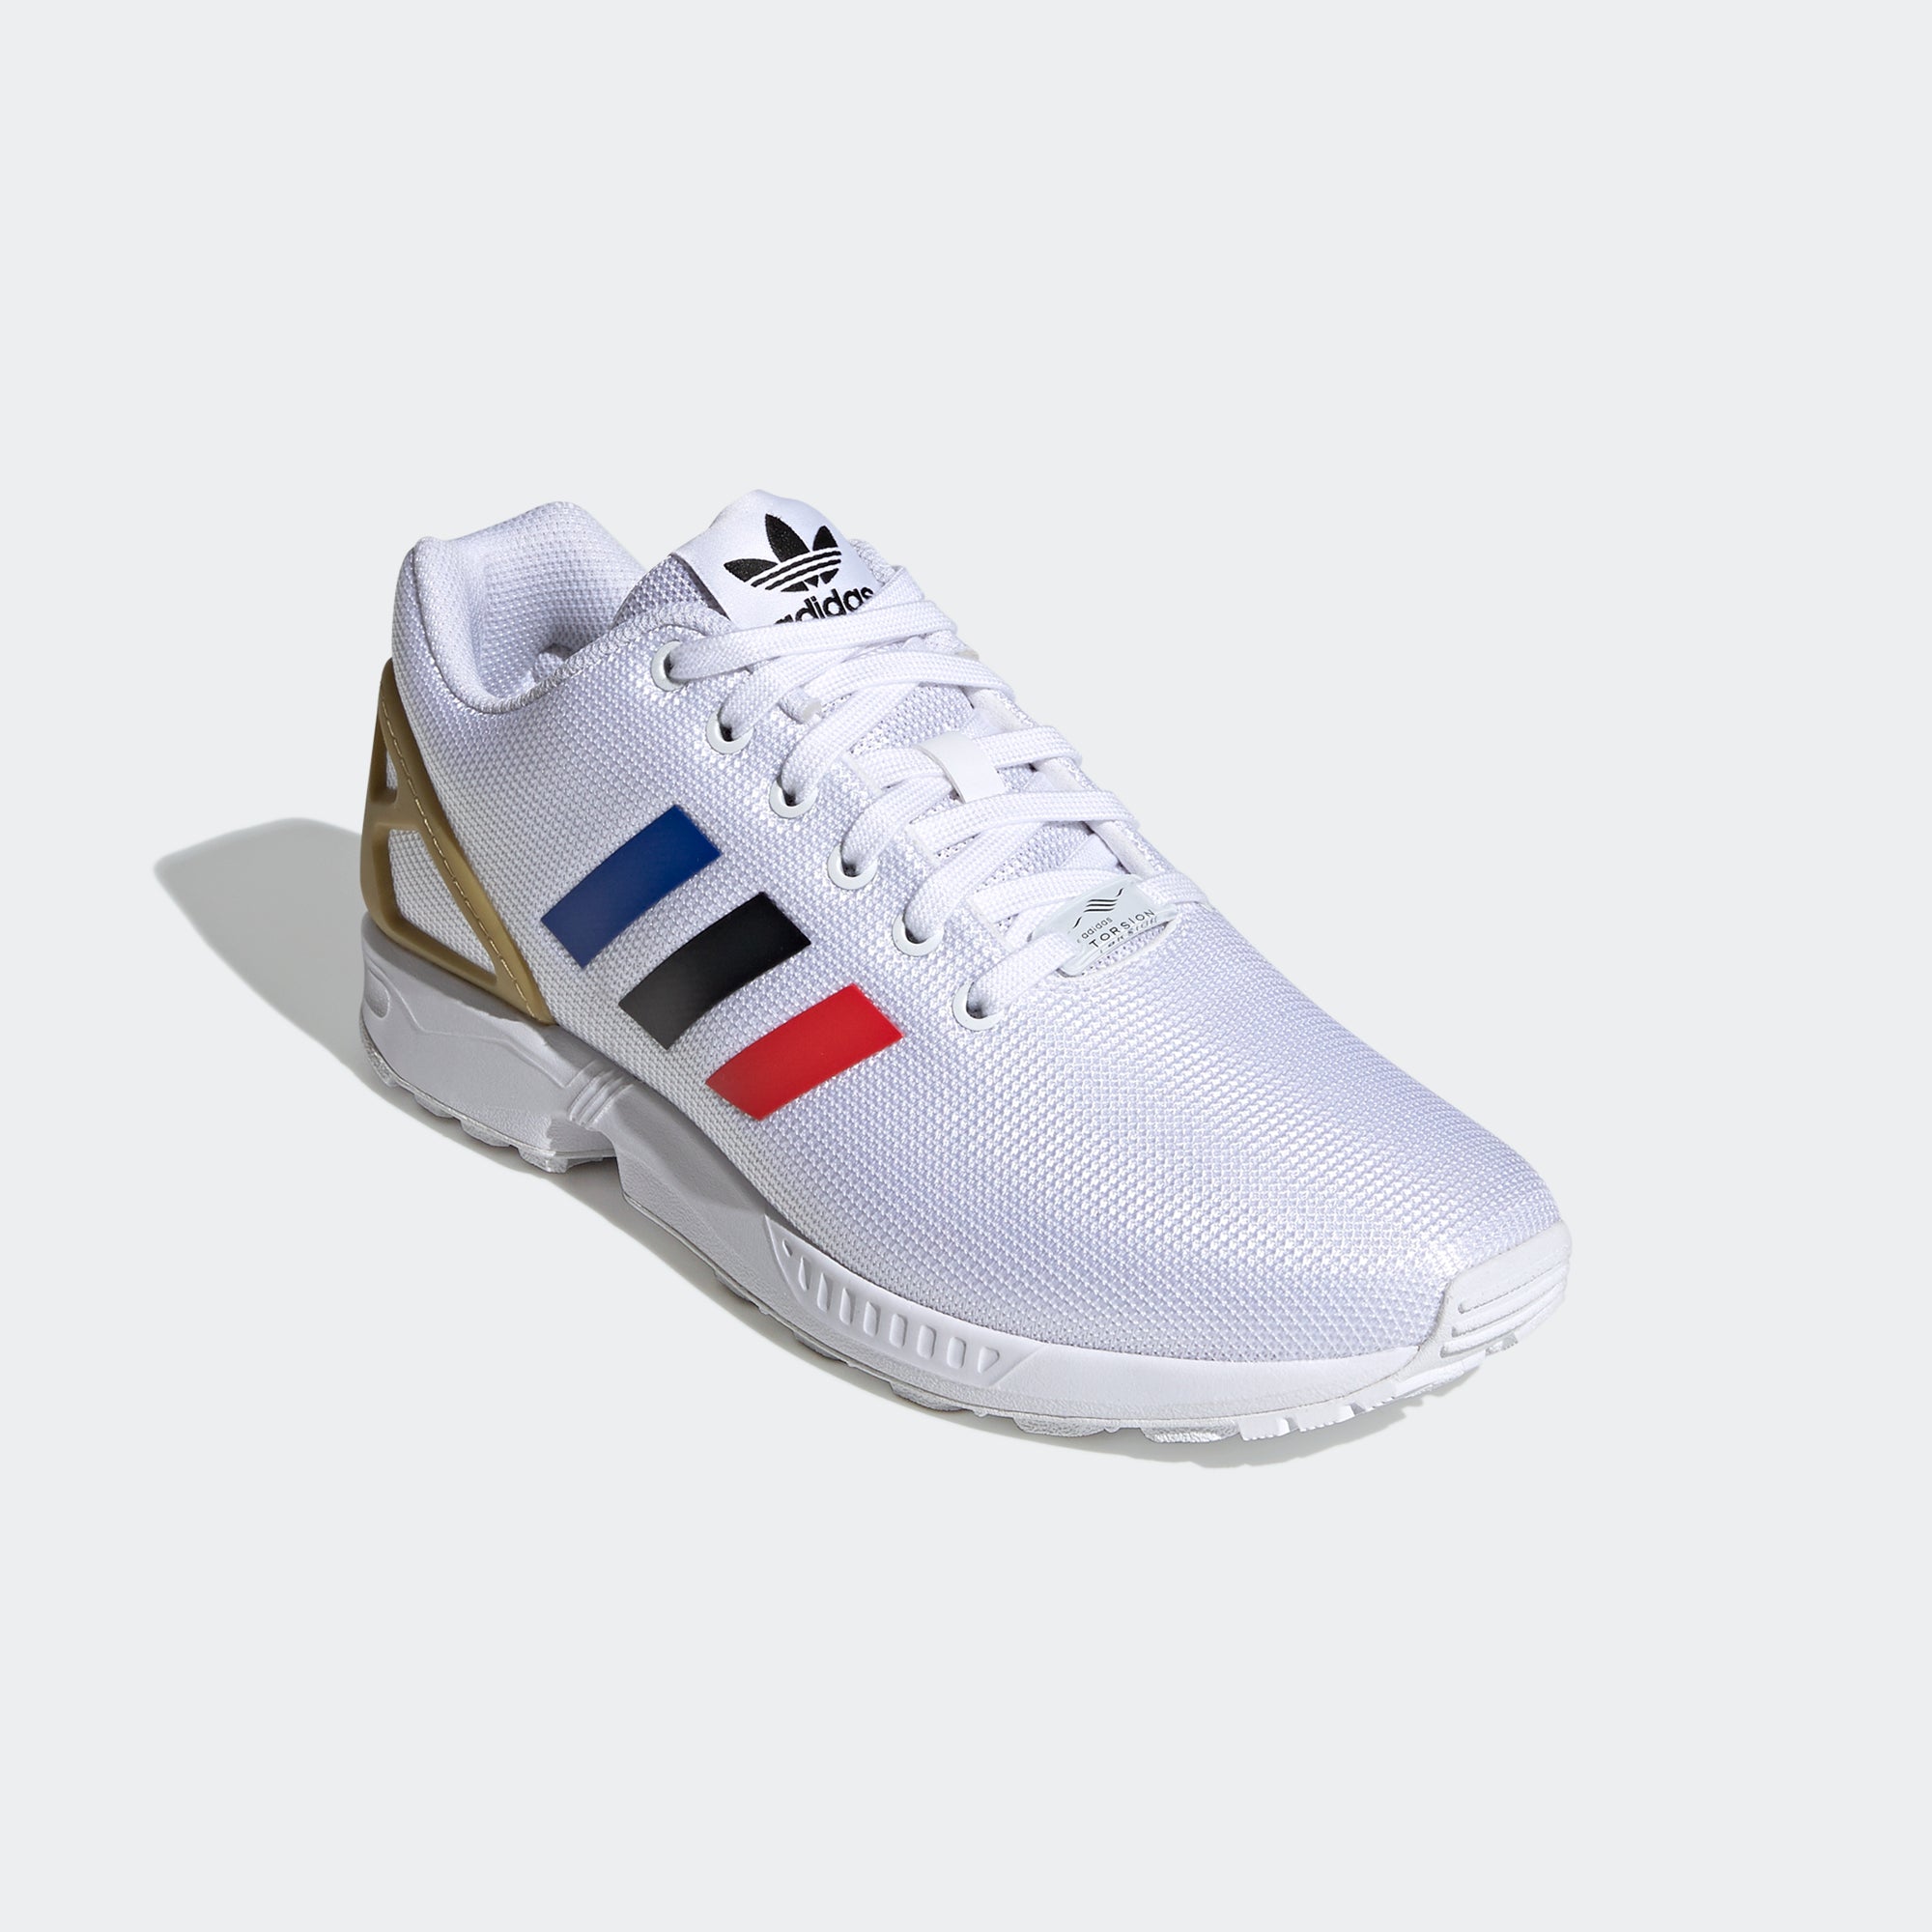 andere passagier Versterker adidas ZX Flux Shoes White | Chicago City Sports